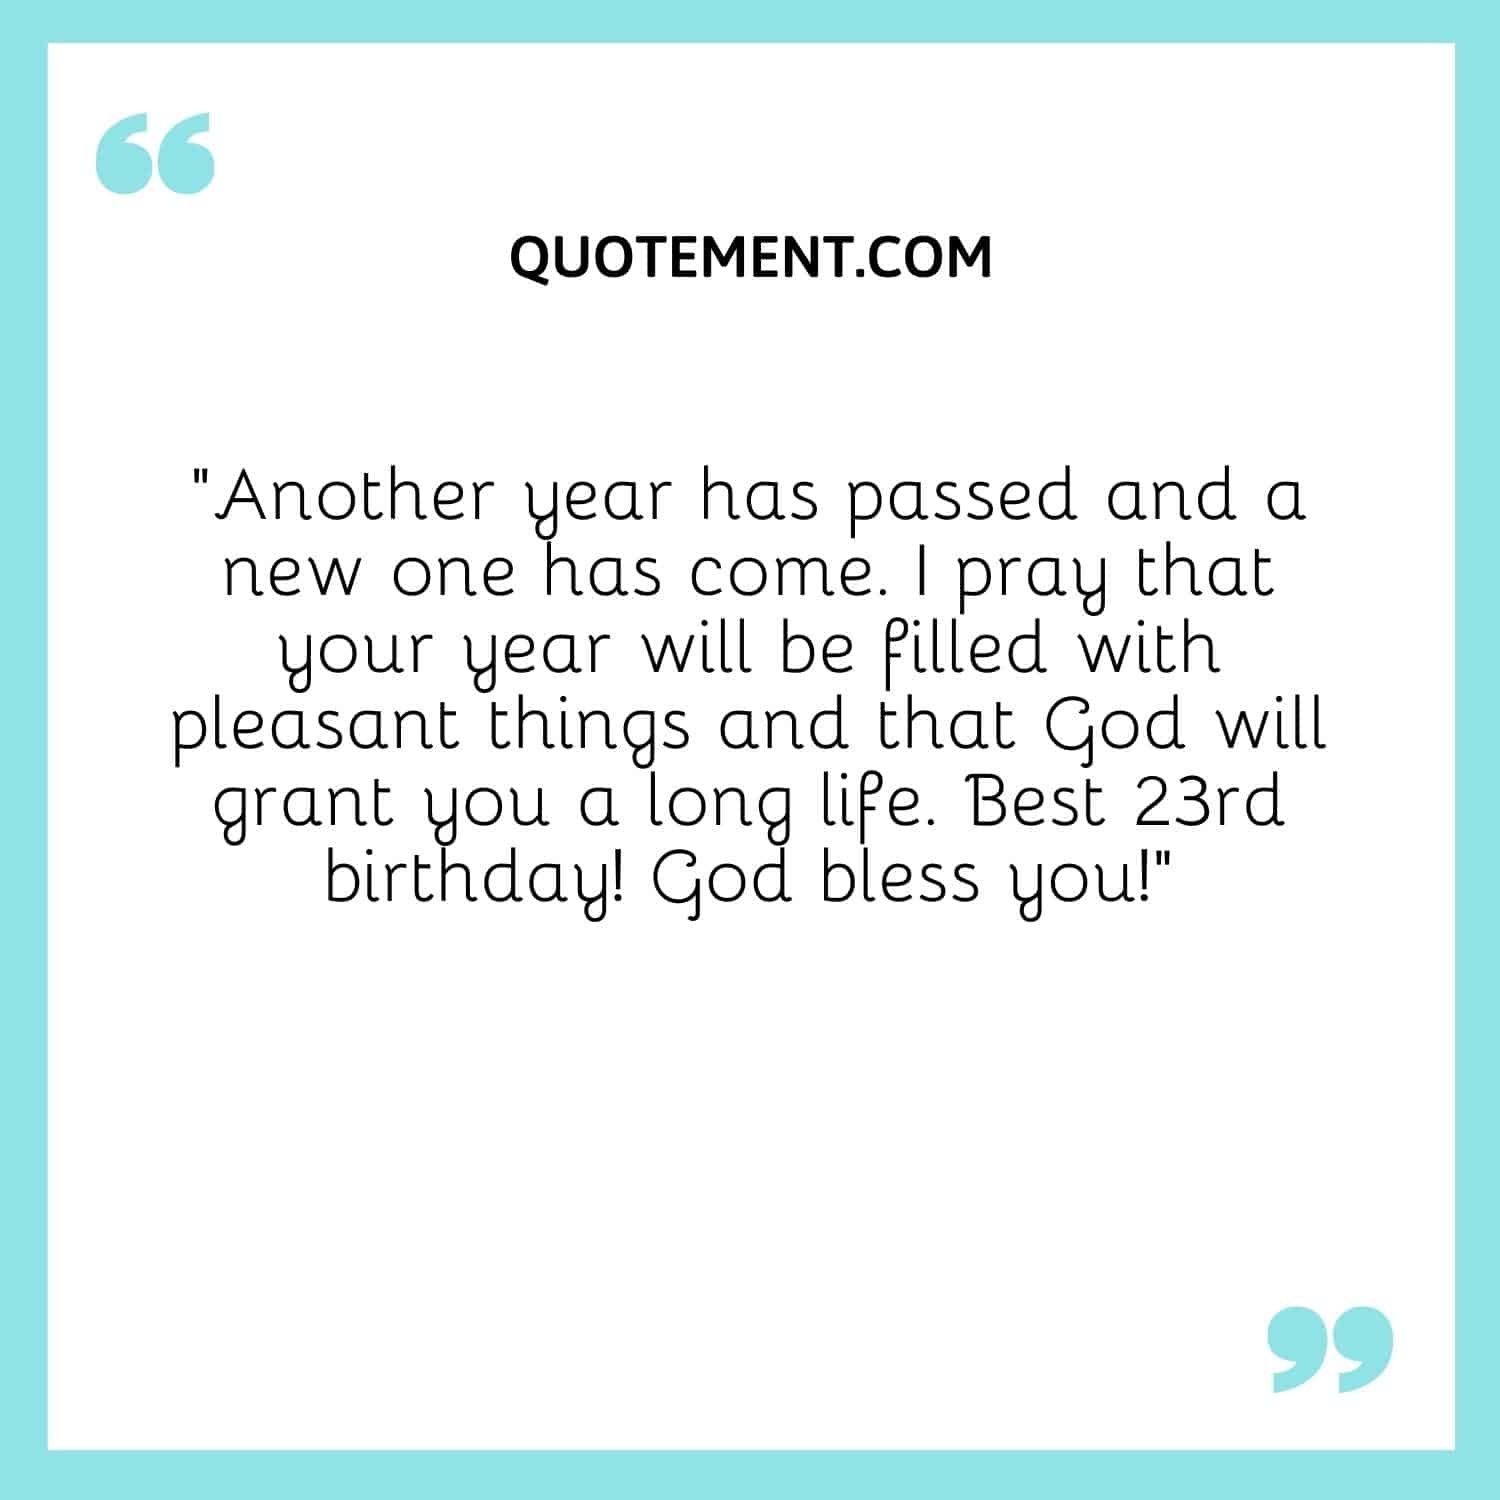 I pray that your year will be filled with pleasant things and that God will grant you a long life